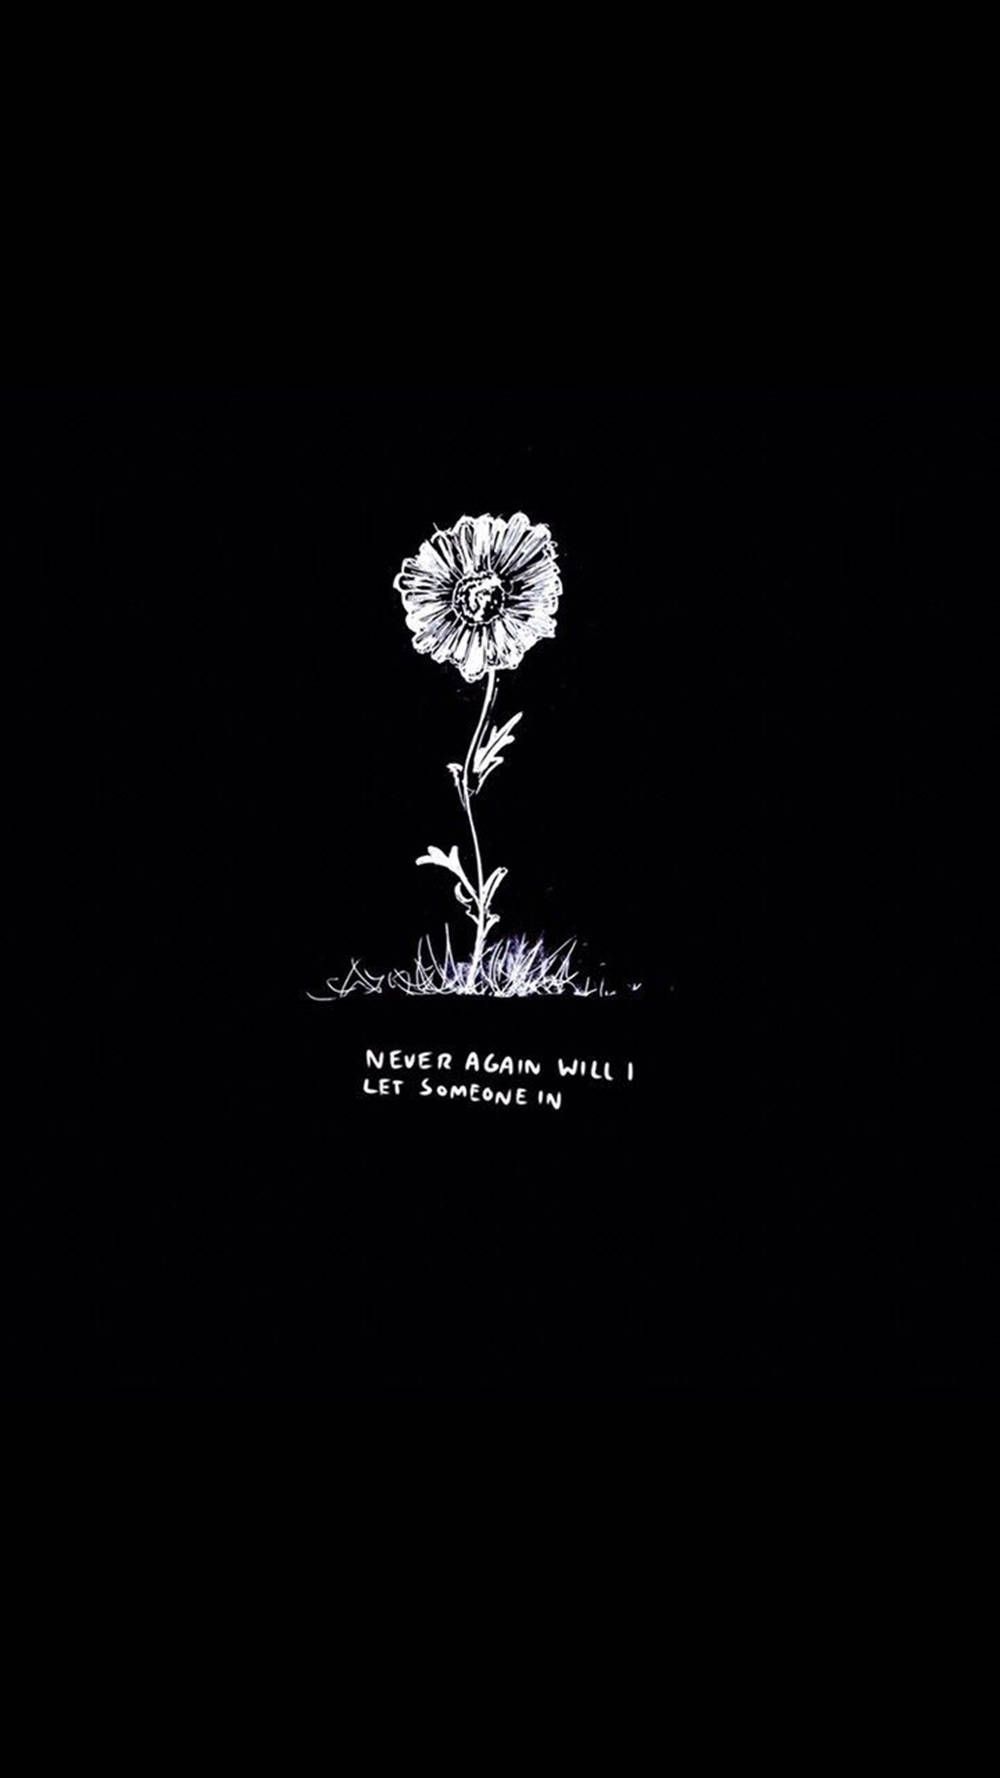 A black and white image of the flower - Dark, sad